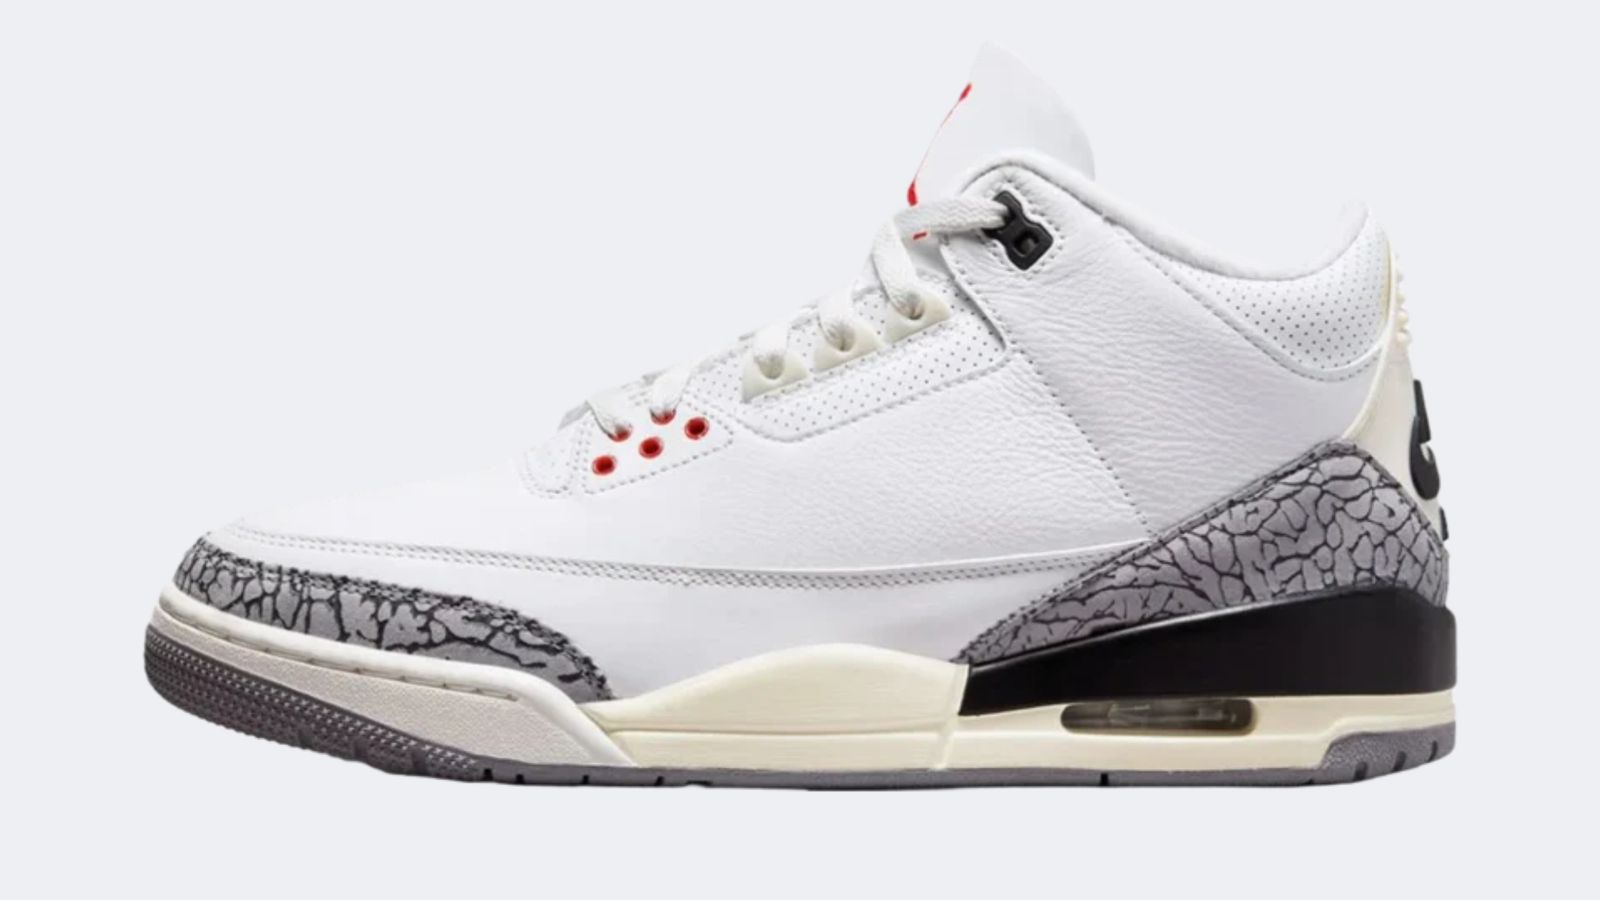 Air Jordan 3 Reimagined "White Cement" product image of a white sneaker featuring a pre-aged midsole, elephant print overlays, and red details.